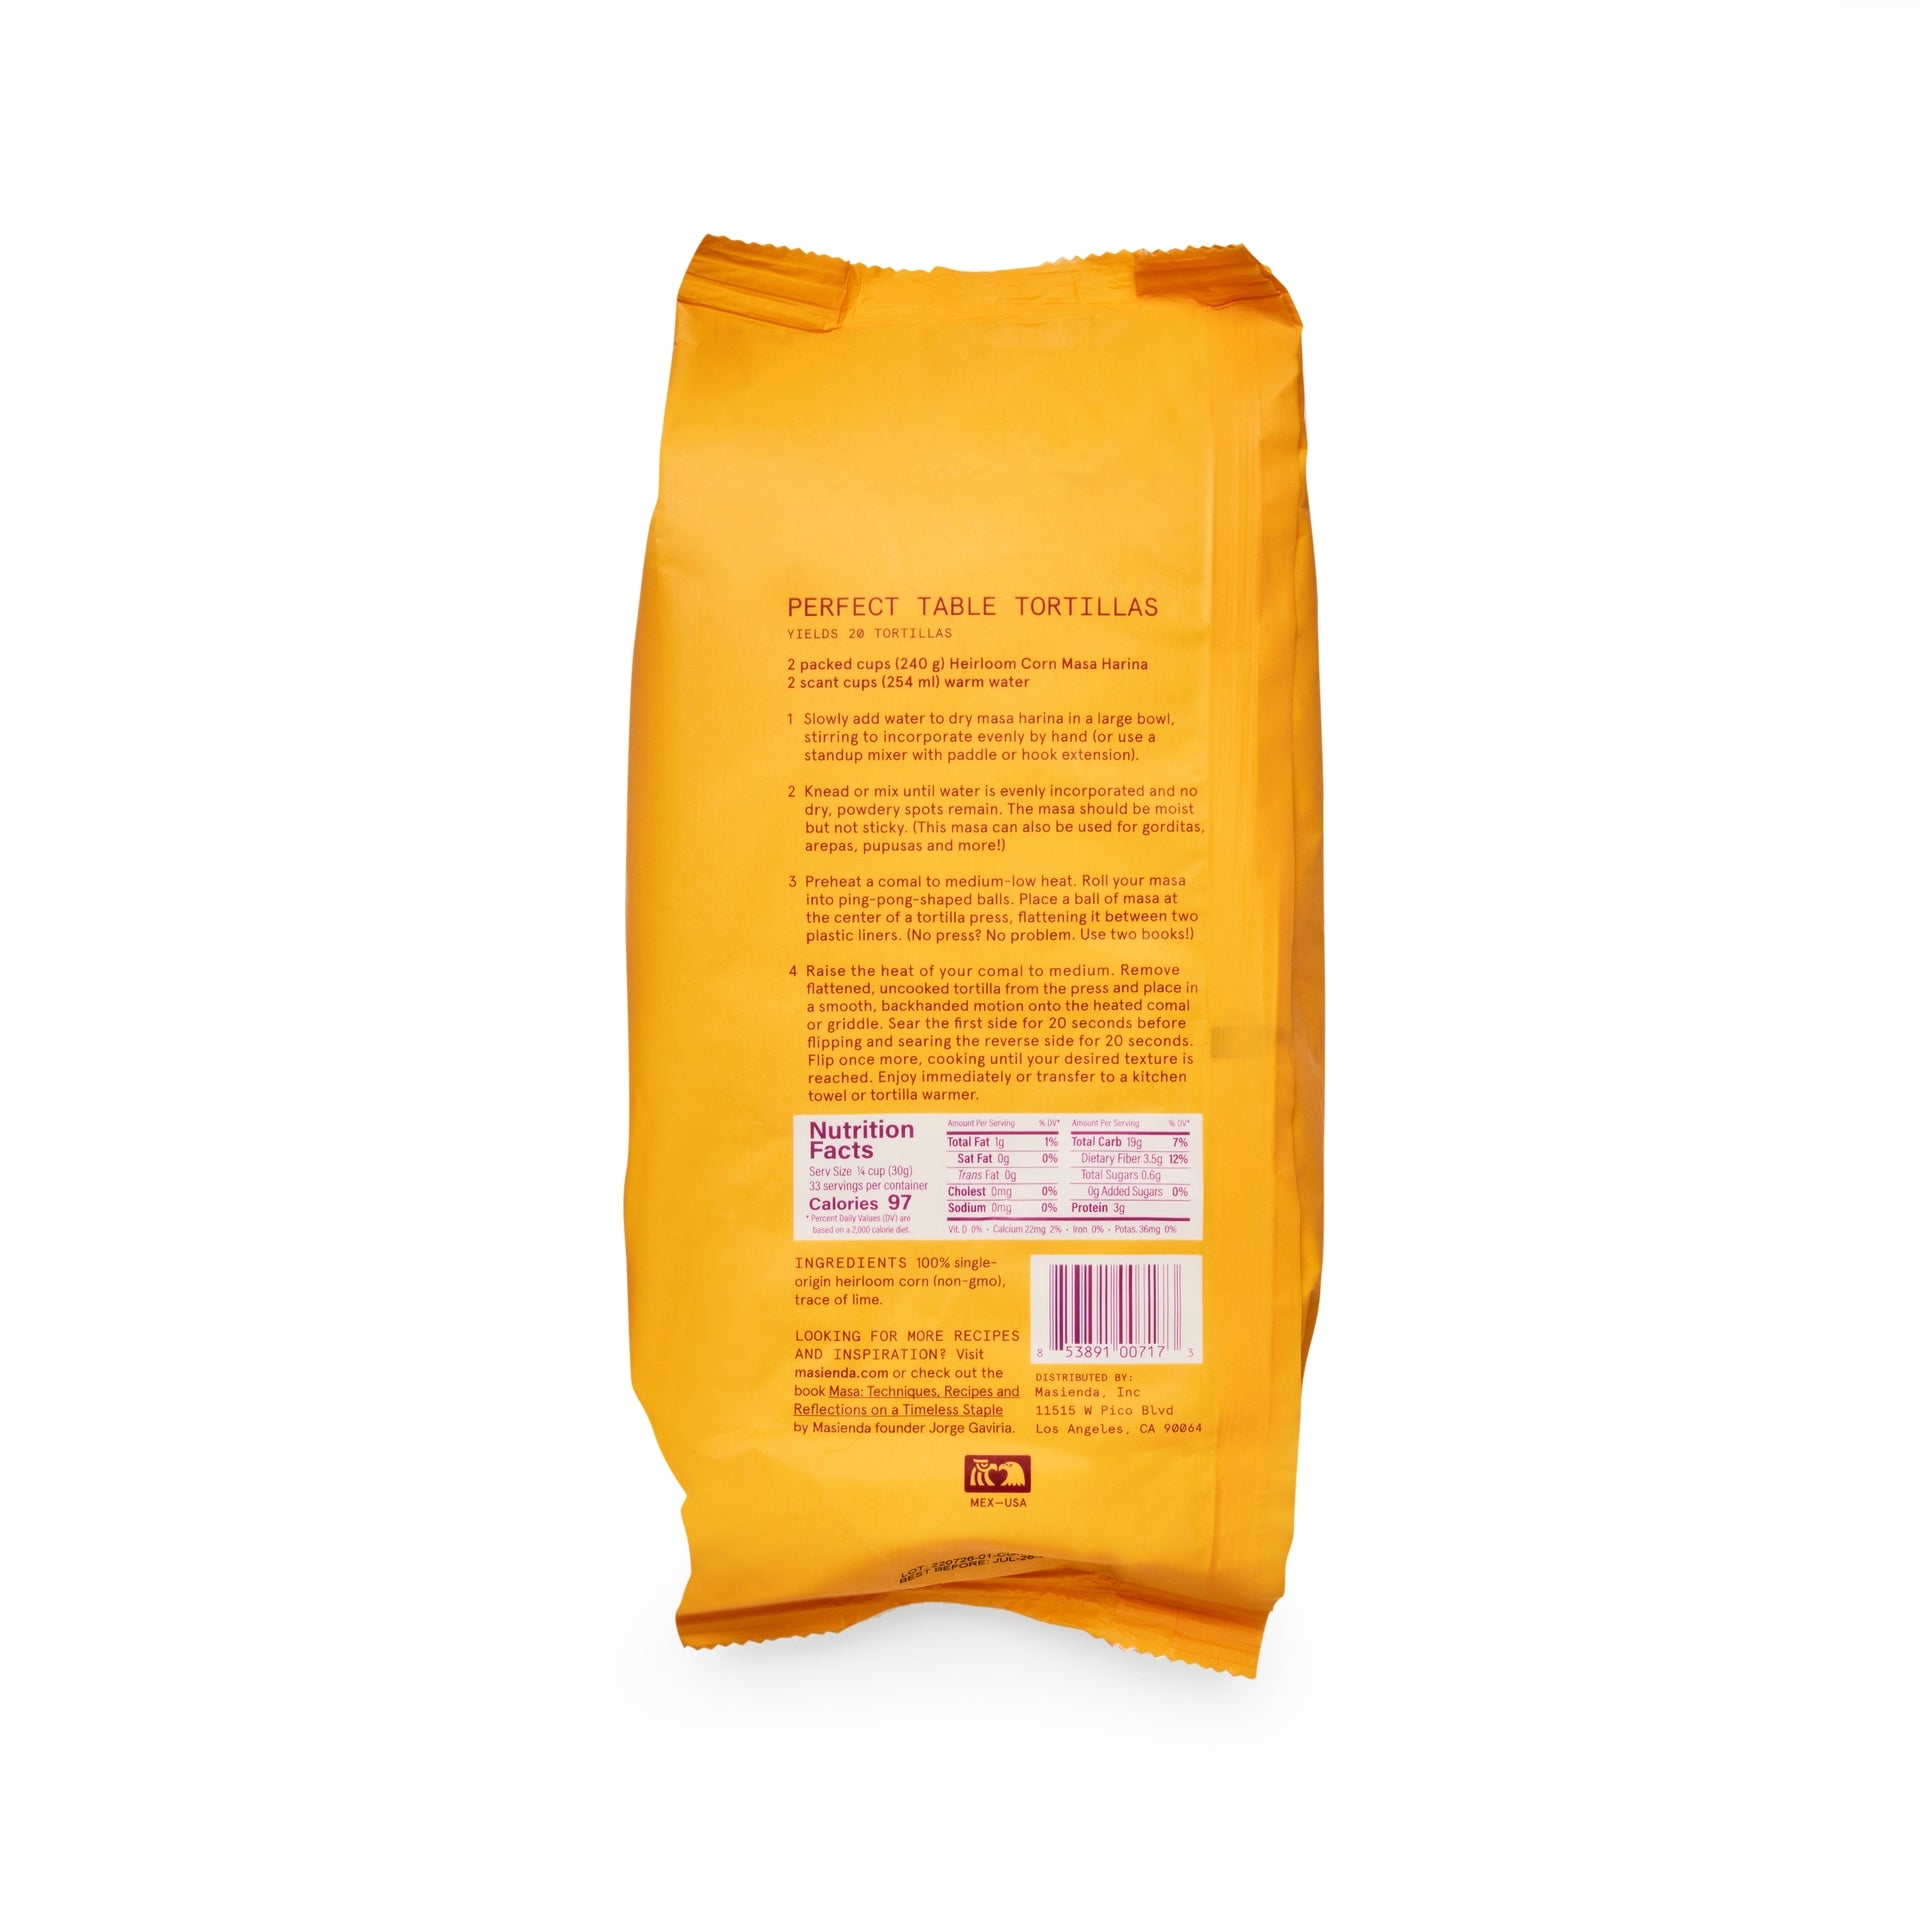 Masienda's best-selling Heirloom Yellow Corn Masa Harina is a fine-ground nixtamalized corn flour. Its deep flavor comes from high quality heirloom corn, which is cooked, slow dried and milled to perfection in small batches. Never genetically modified. Always gluten-free.